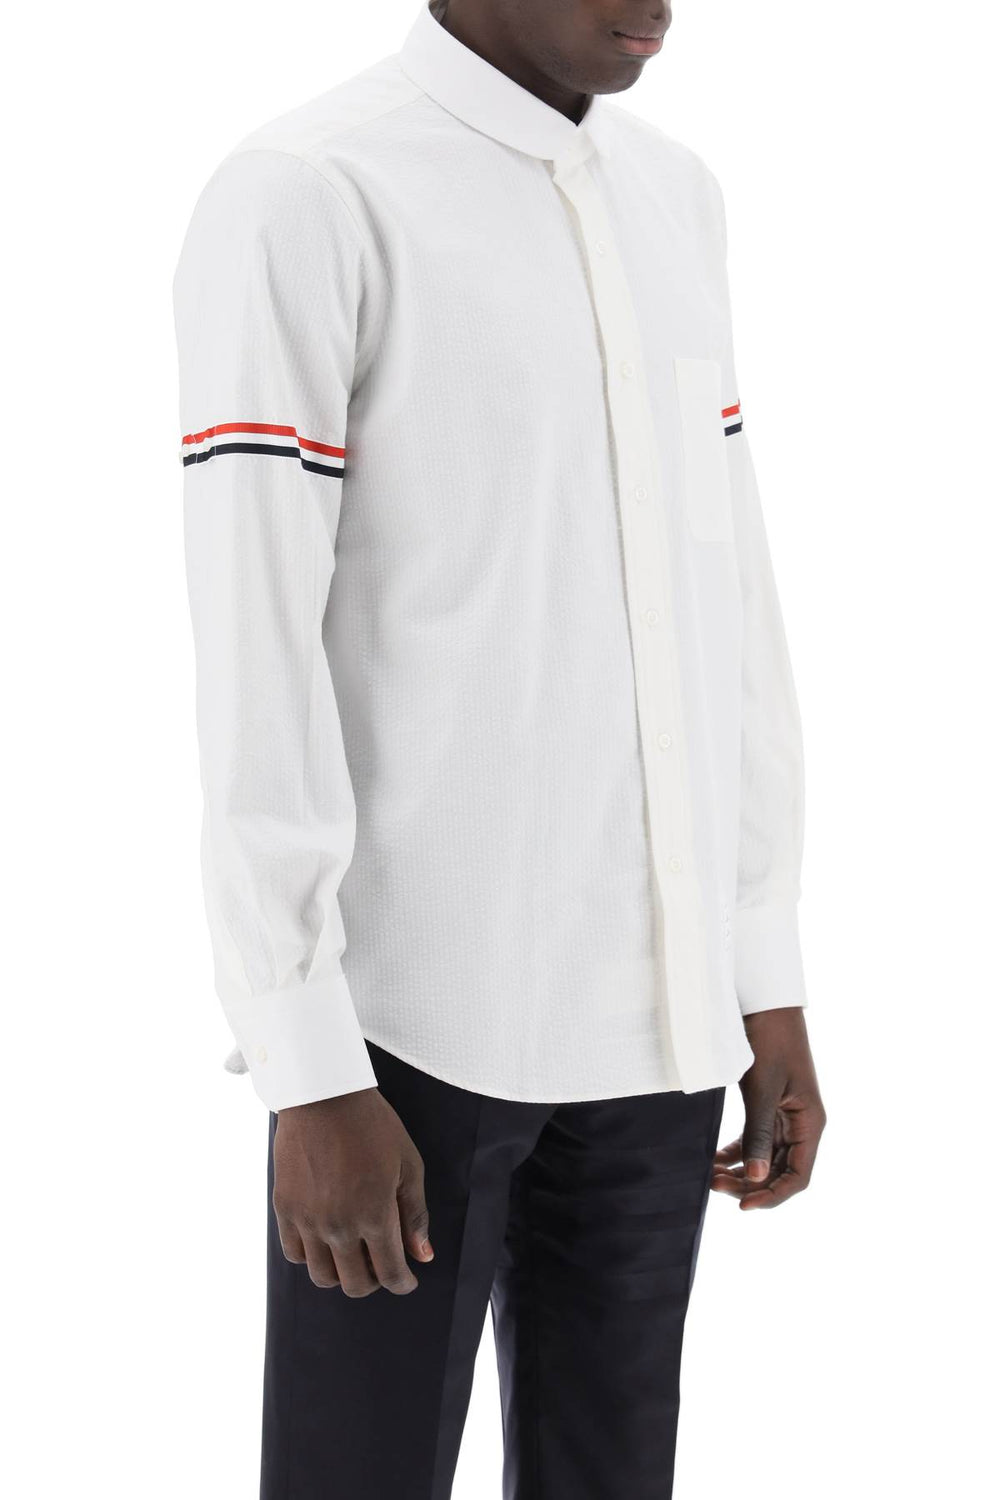 Thom browne seersucker shirt with rounded collar-1